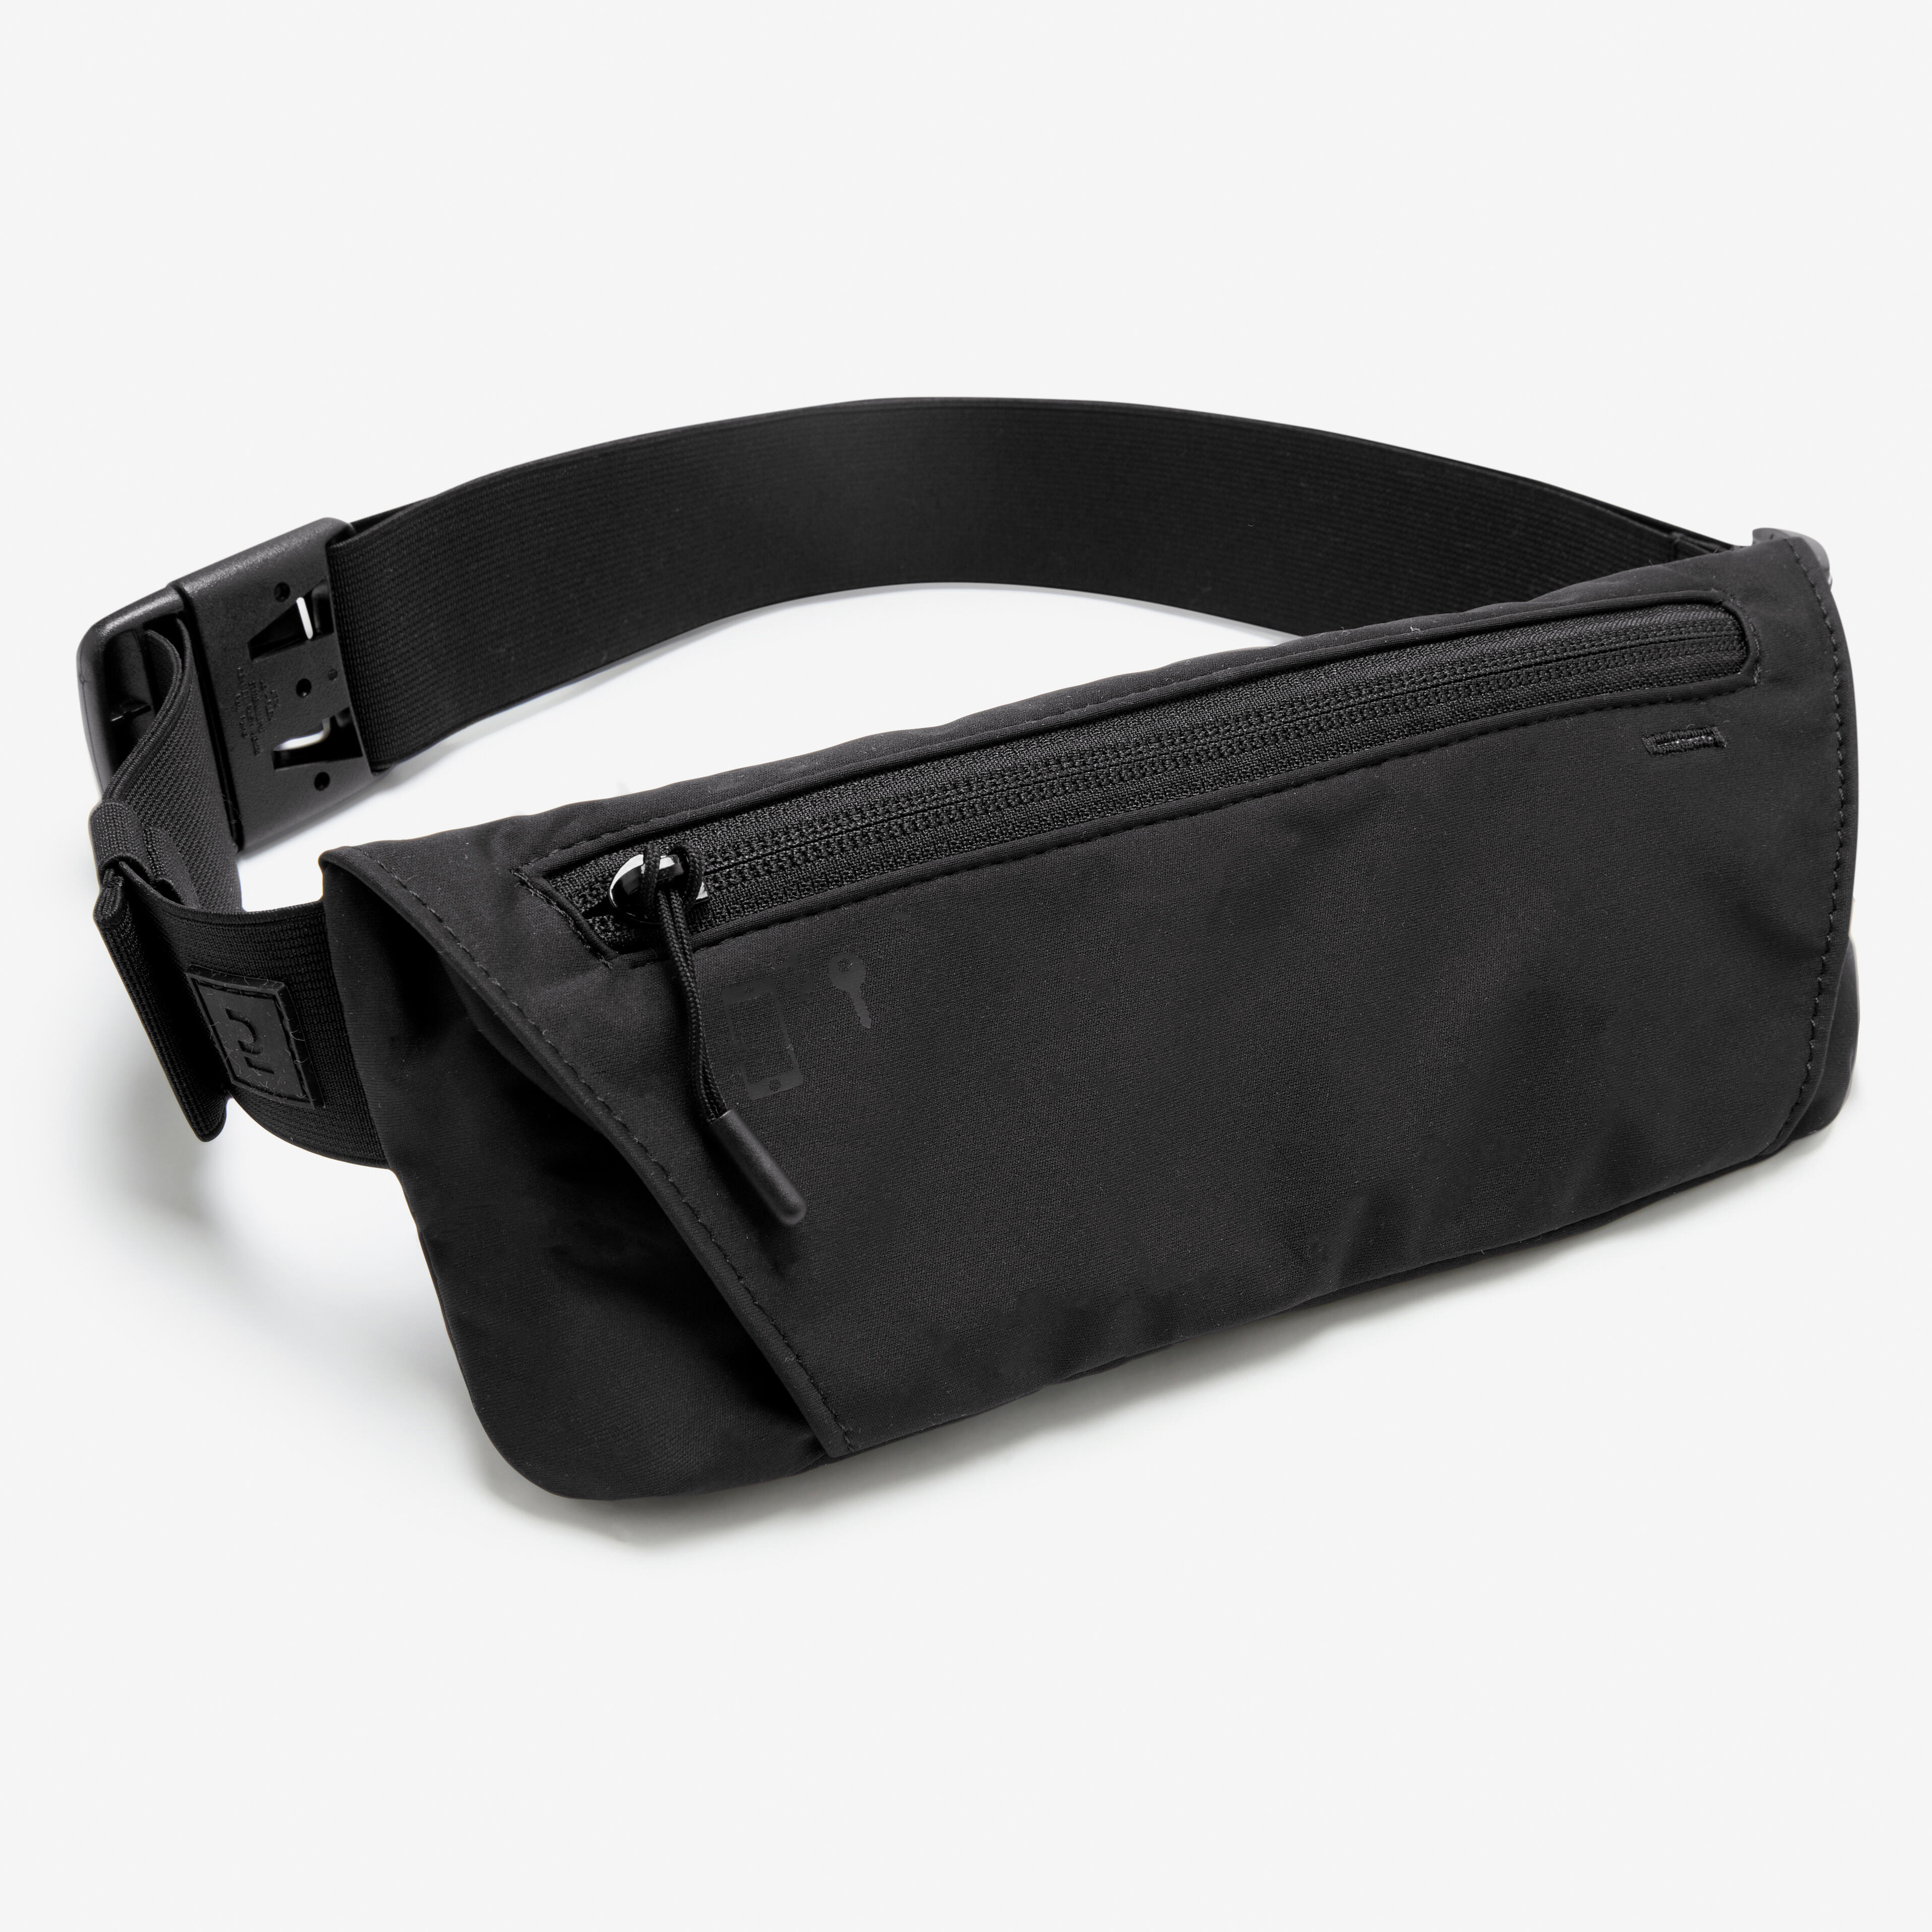 Quechua UltraCompact Travel Waist Pack Review  Pack Hacker